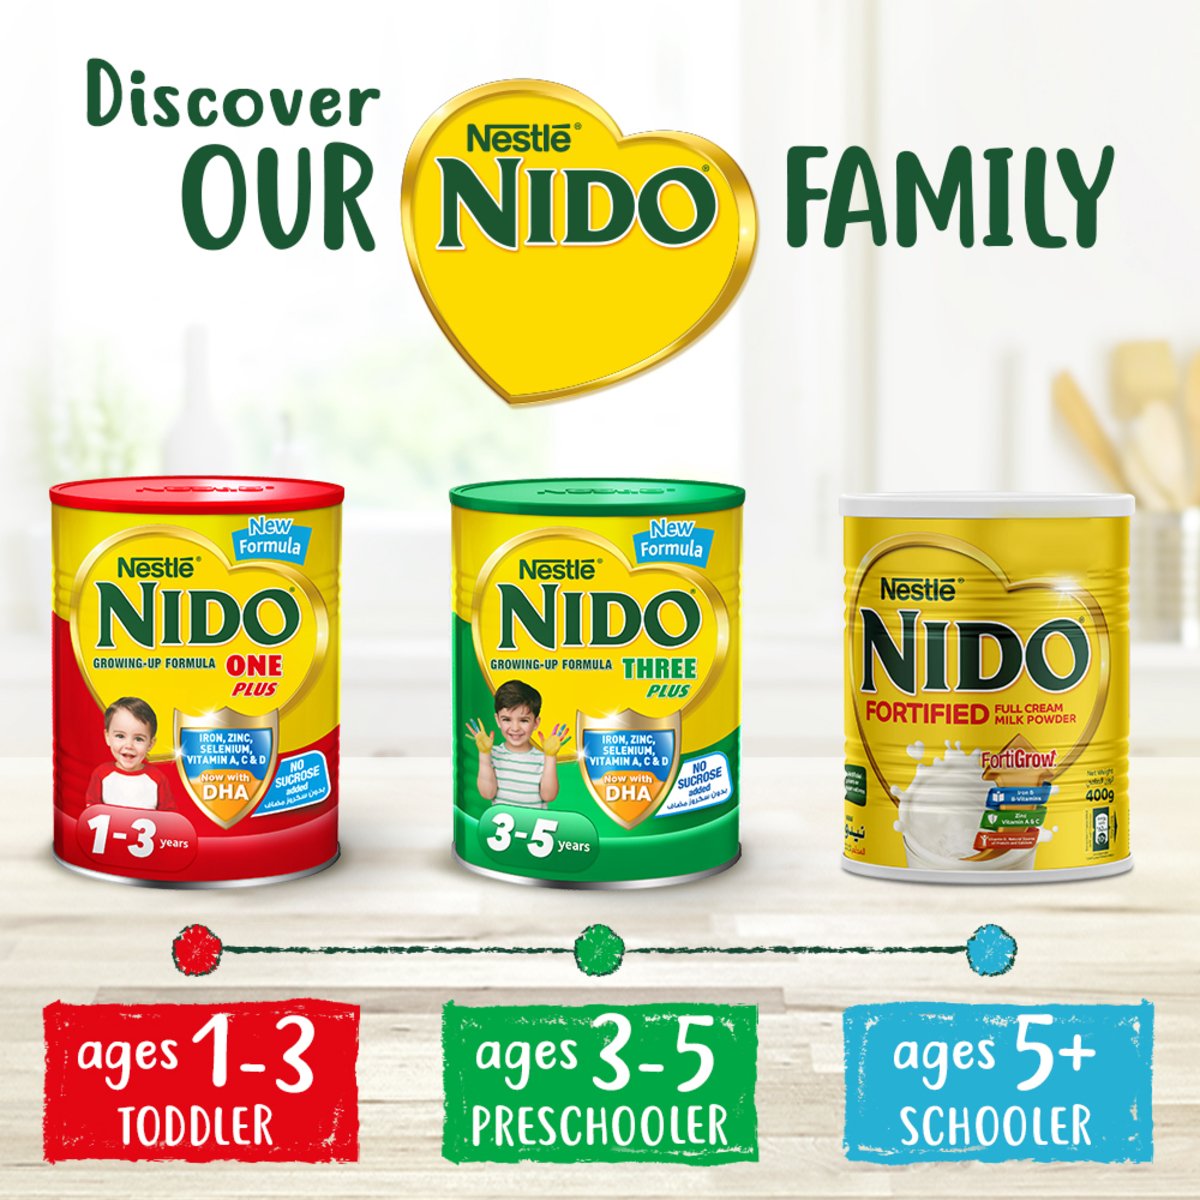 Nido Three Plus Growing Up Formula for Toddlers From 3-5 years 400g